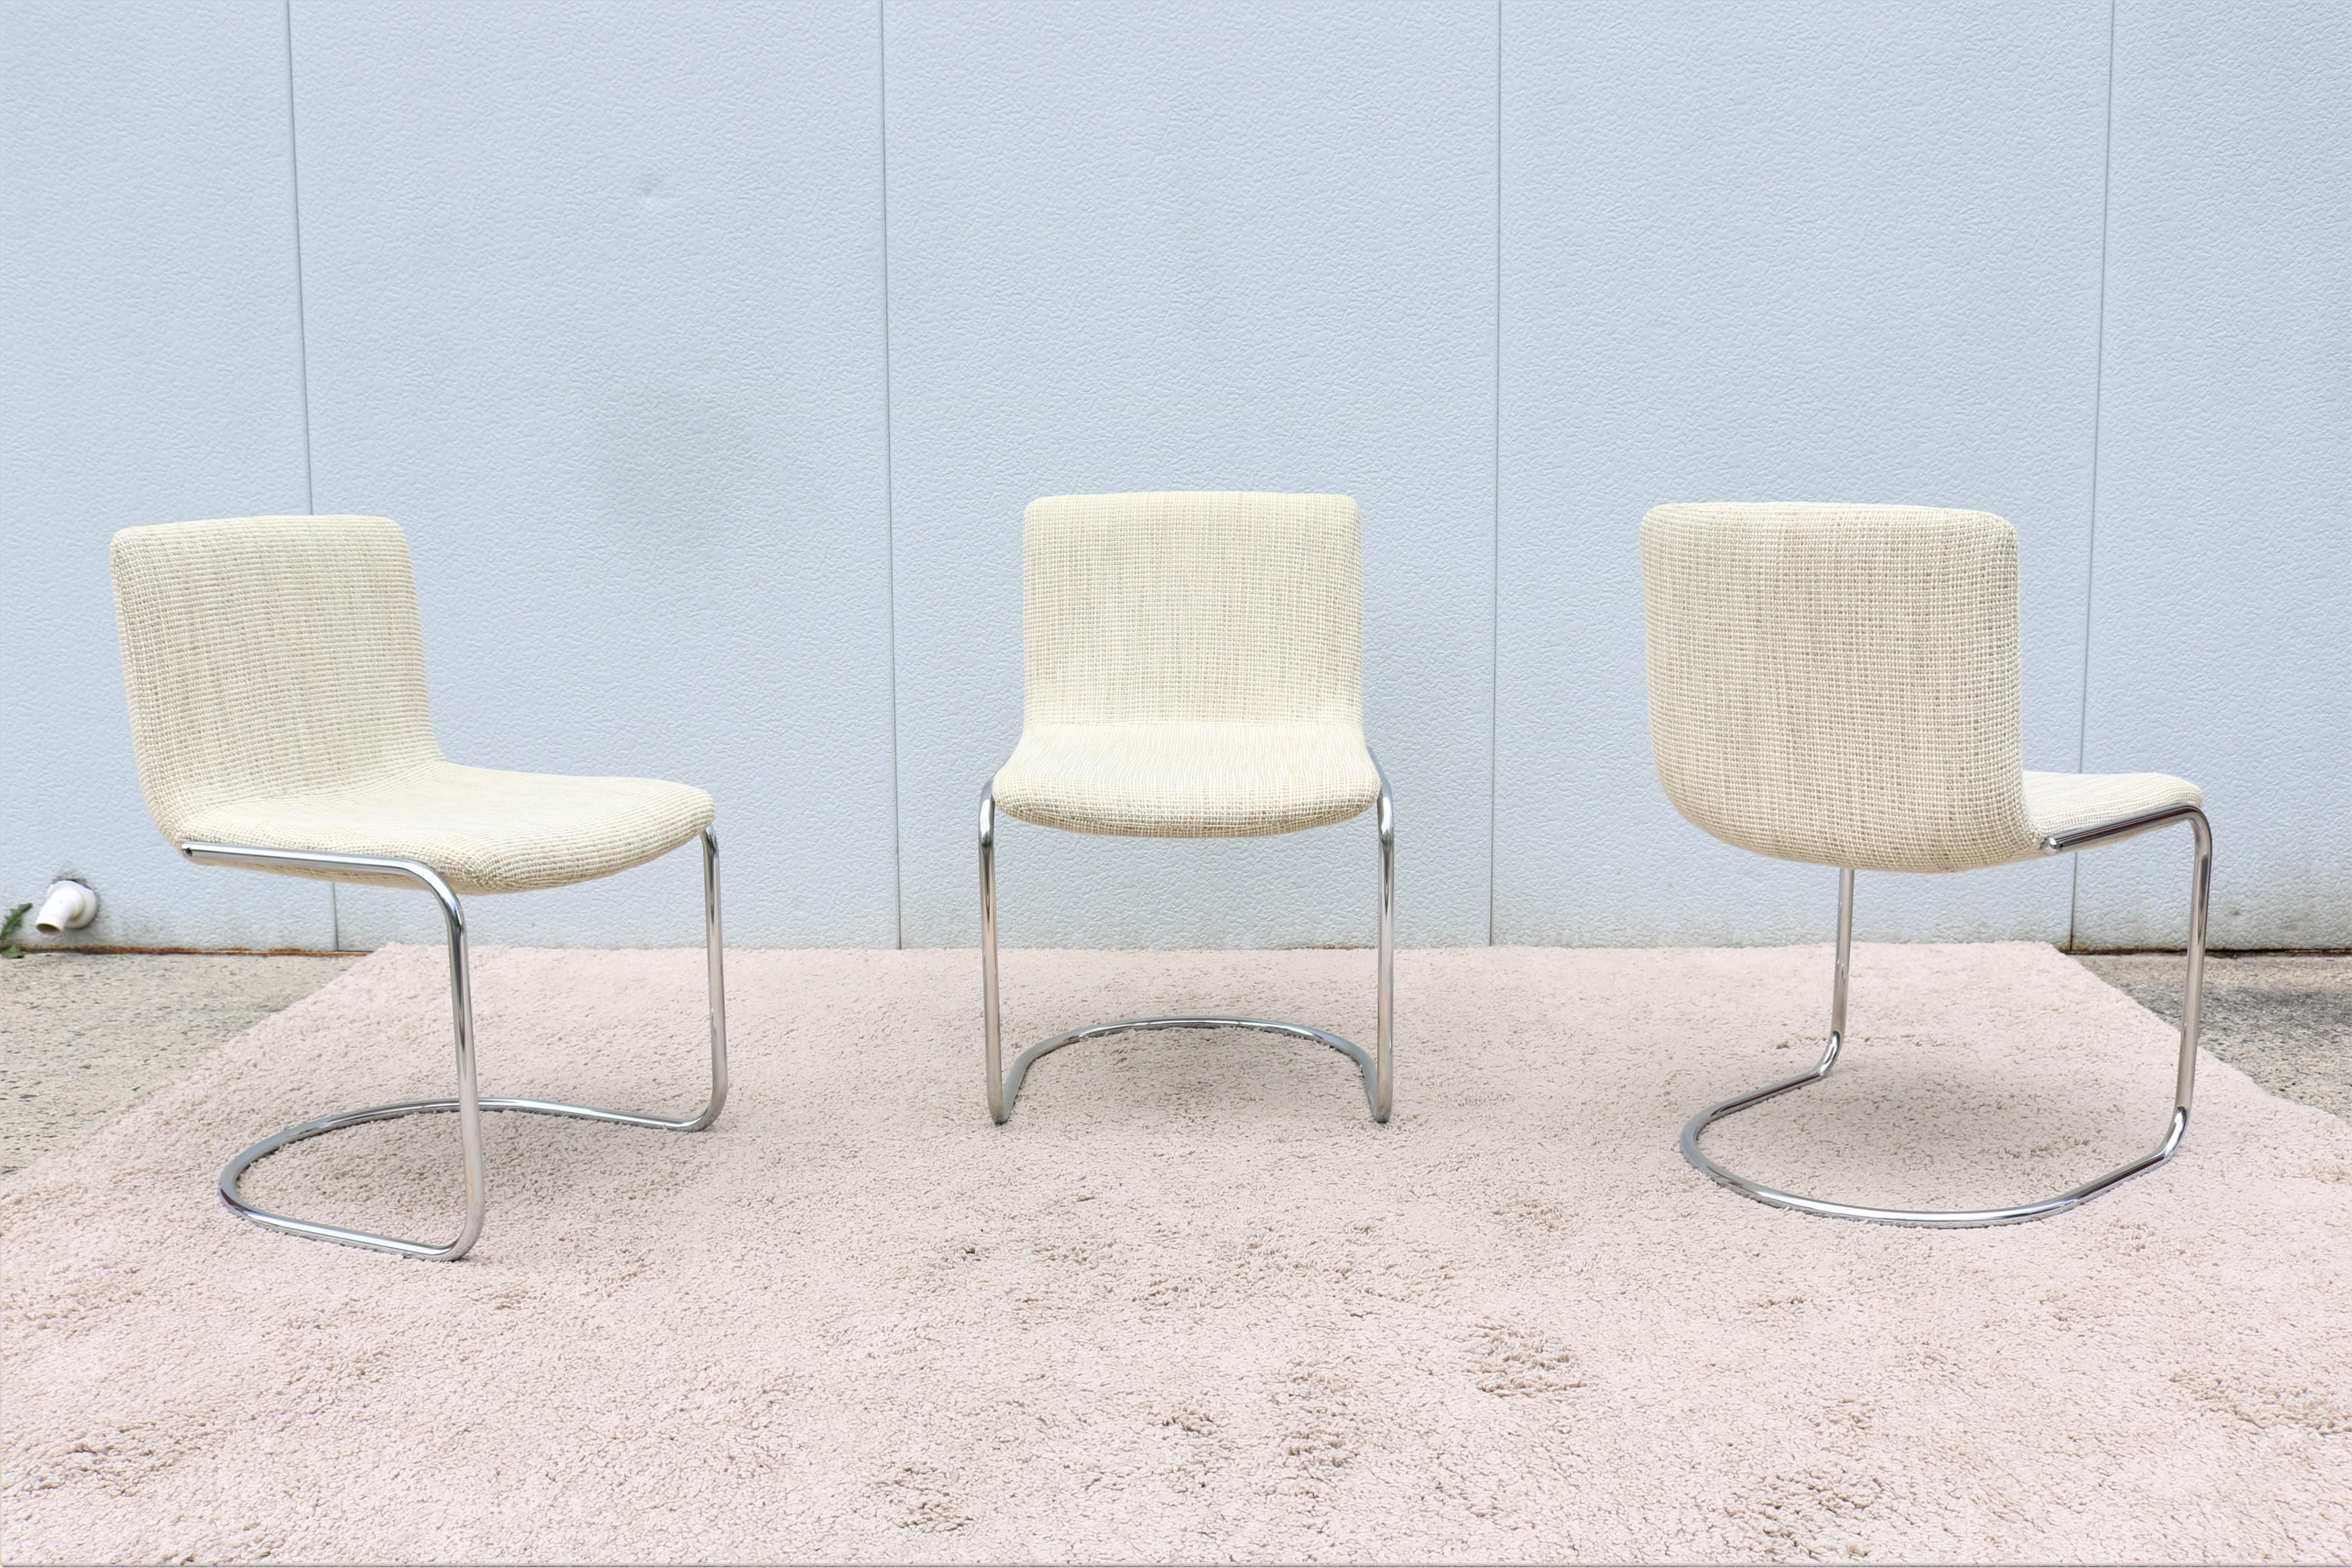 Marvelous 1970s Mid-Century Modern set of 3 lens dining chairs, designed by Giovanni Offredi for Saporiti Italia in 1968.
Lens chair is one of the classics of the Saporiti collections, The tubular frame provides a sculptural and architectural